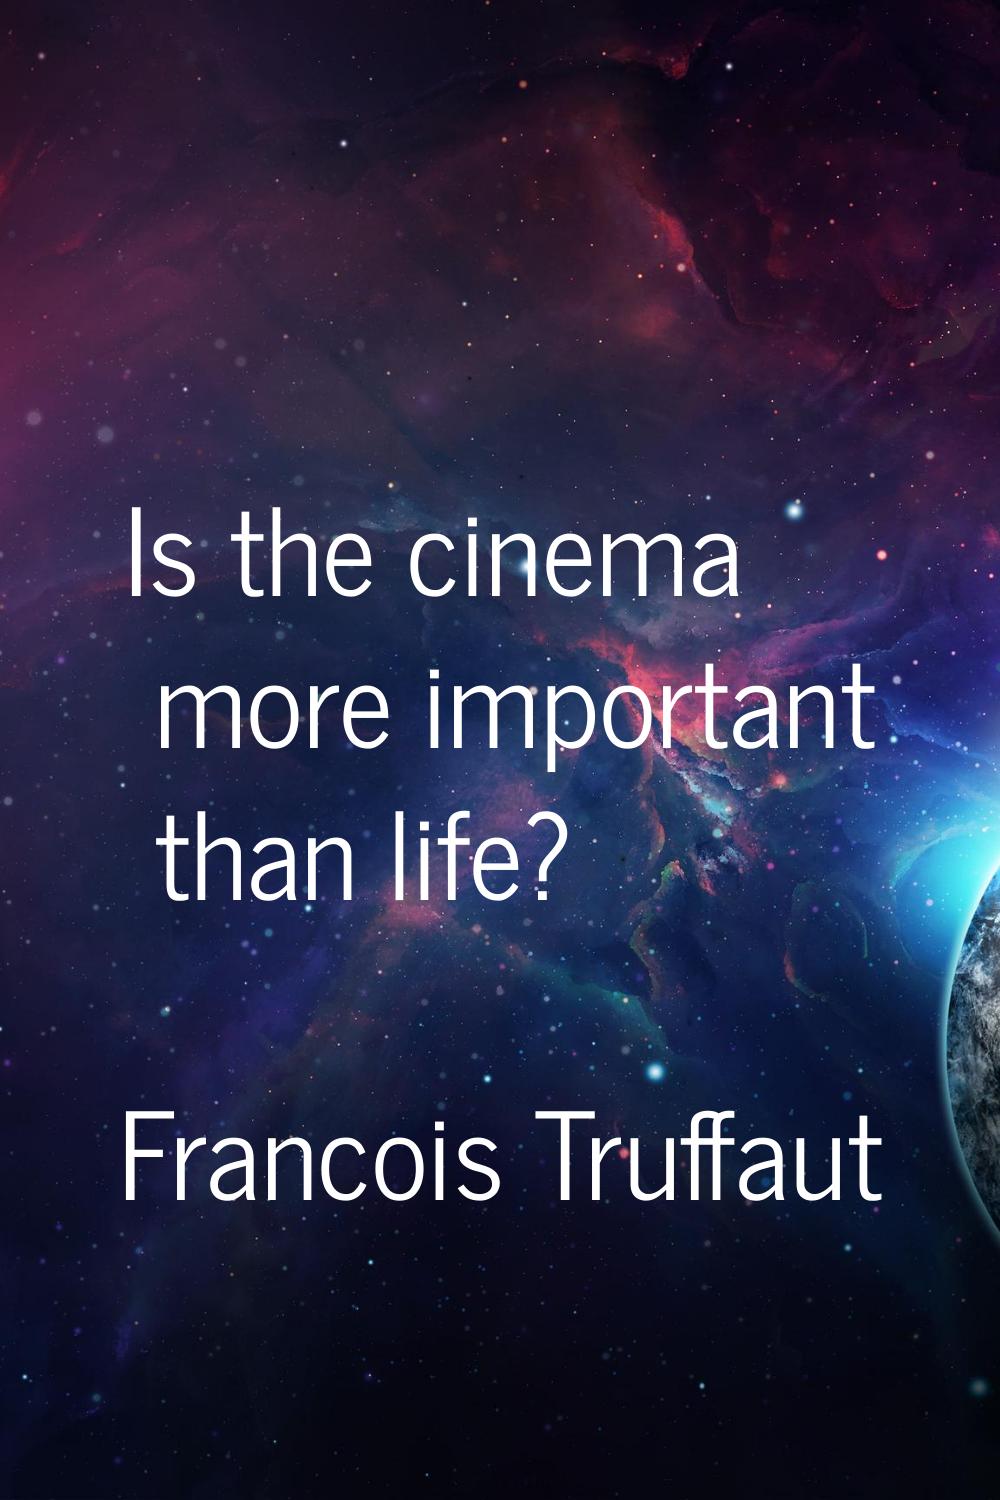 Is the cinema more important than life?